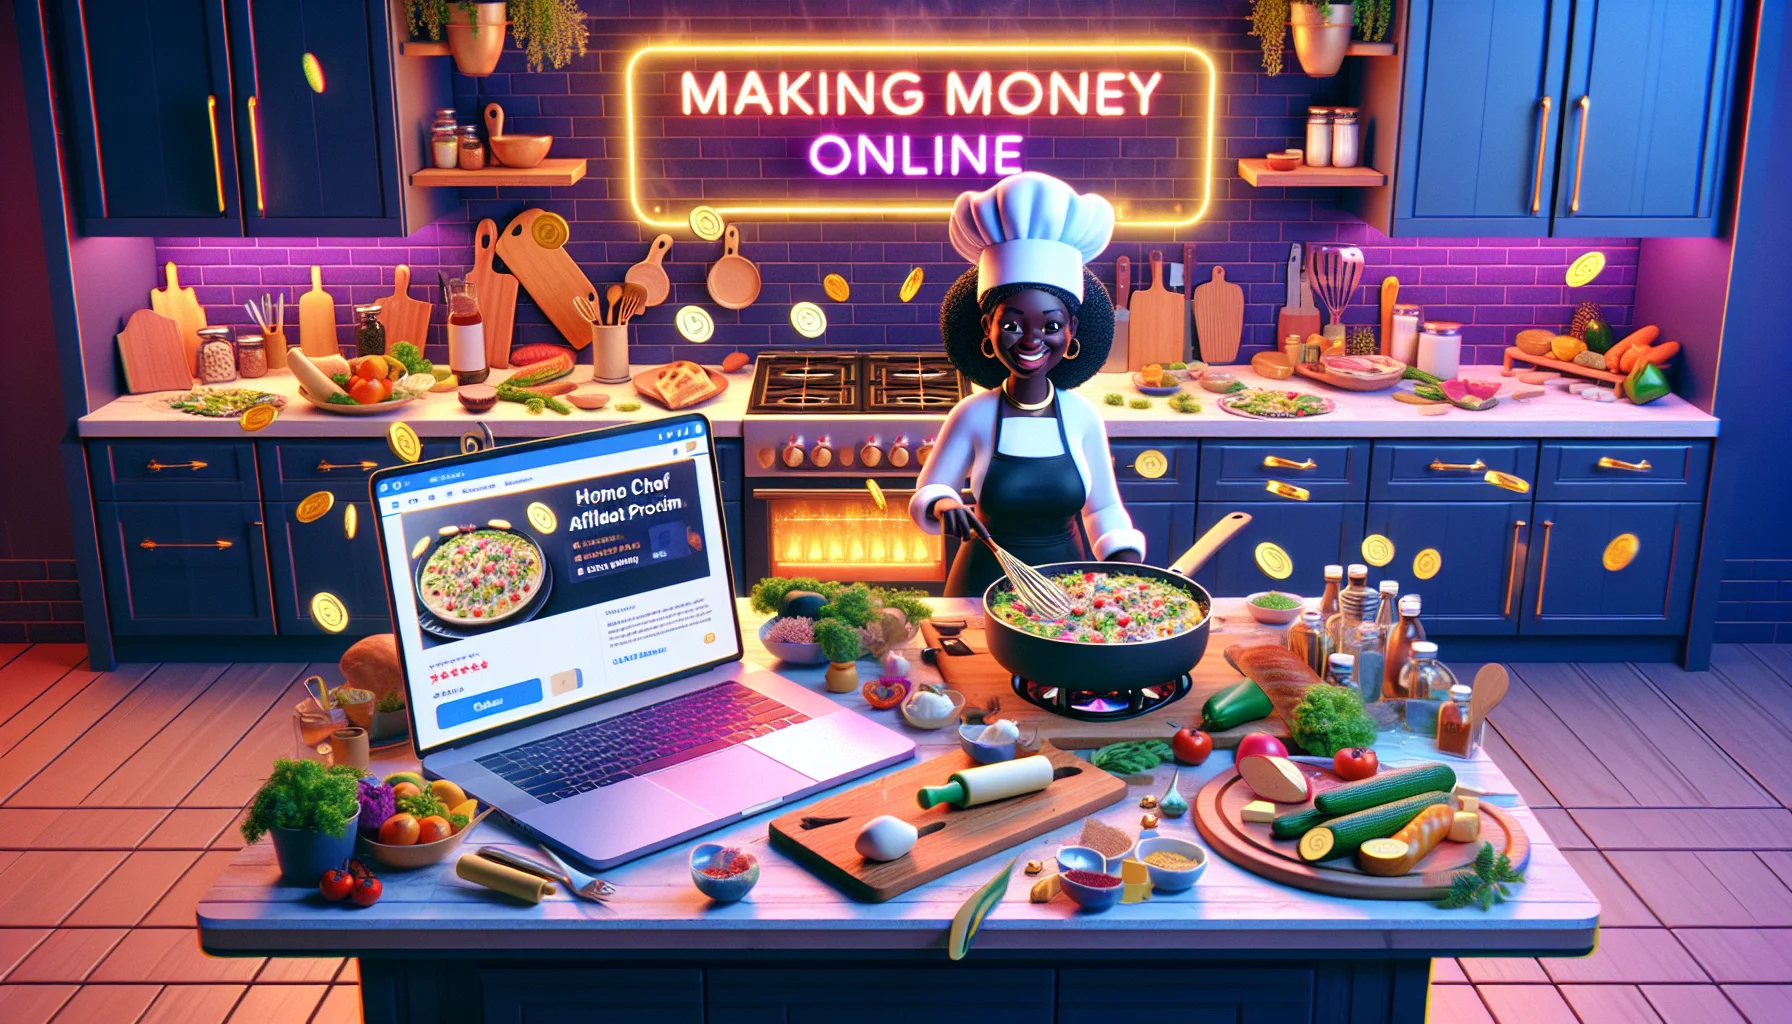 Imagine a lively scene set in a modern kitchen. In the midst of the bustling activity, a cheerful Black female chef is preparing a mouth-watering dish. Chopping boards, cooking utensils, and various food ingredients are scattered around enhancing the 'home-soil' feeling of the scenario. Meanwhile, an oversized laptop sits on the kitchen counter, highlighting an advertisement for a Home Chef Affiliate Program. On the laptop screen, animated gold coins are popping out as though indicating potential earnings. The atmosphere teems with promises of 'making money online' - there is a large neon sign hanging above that captures this phrase in bold, glowing letters.